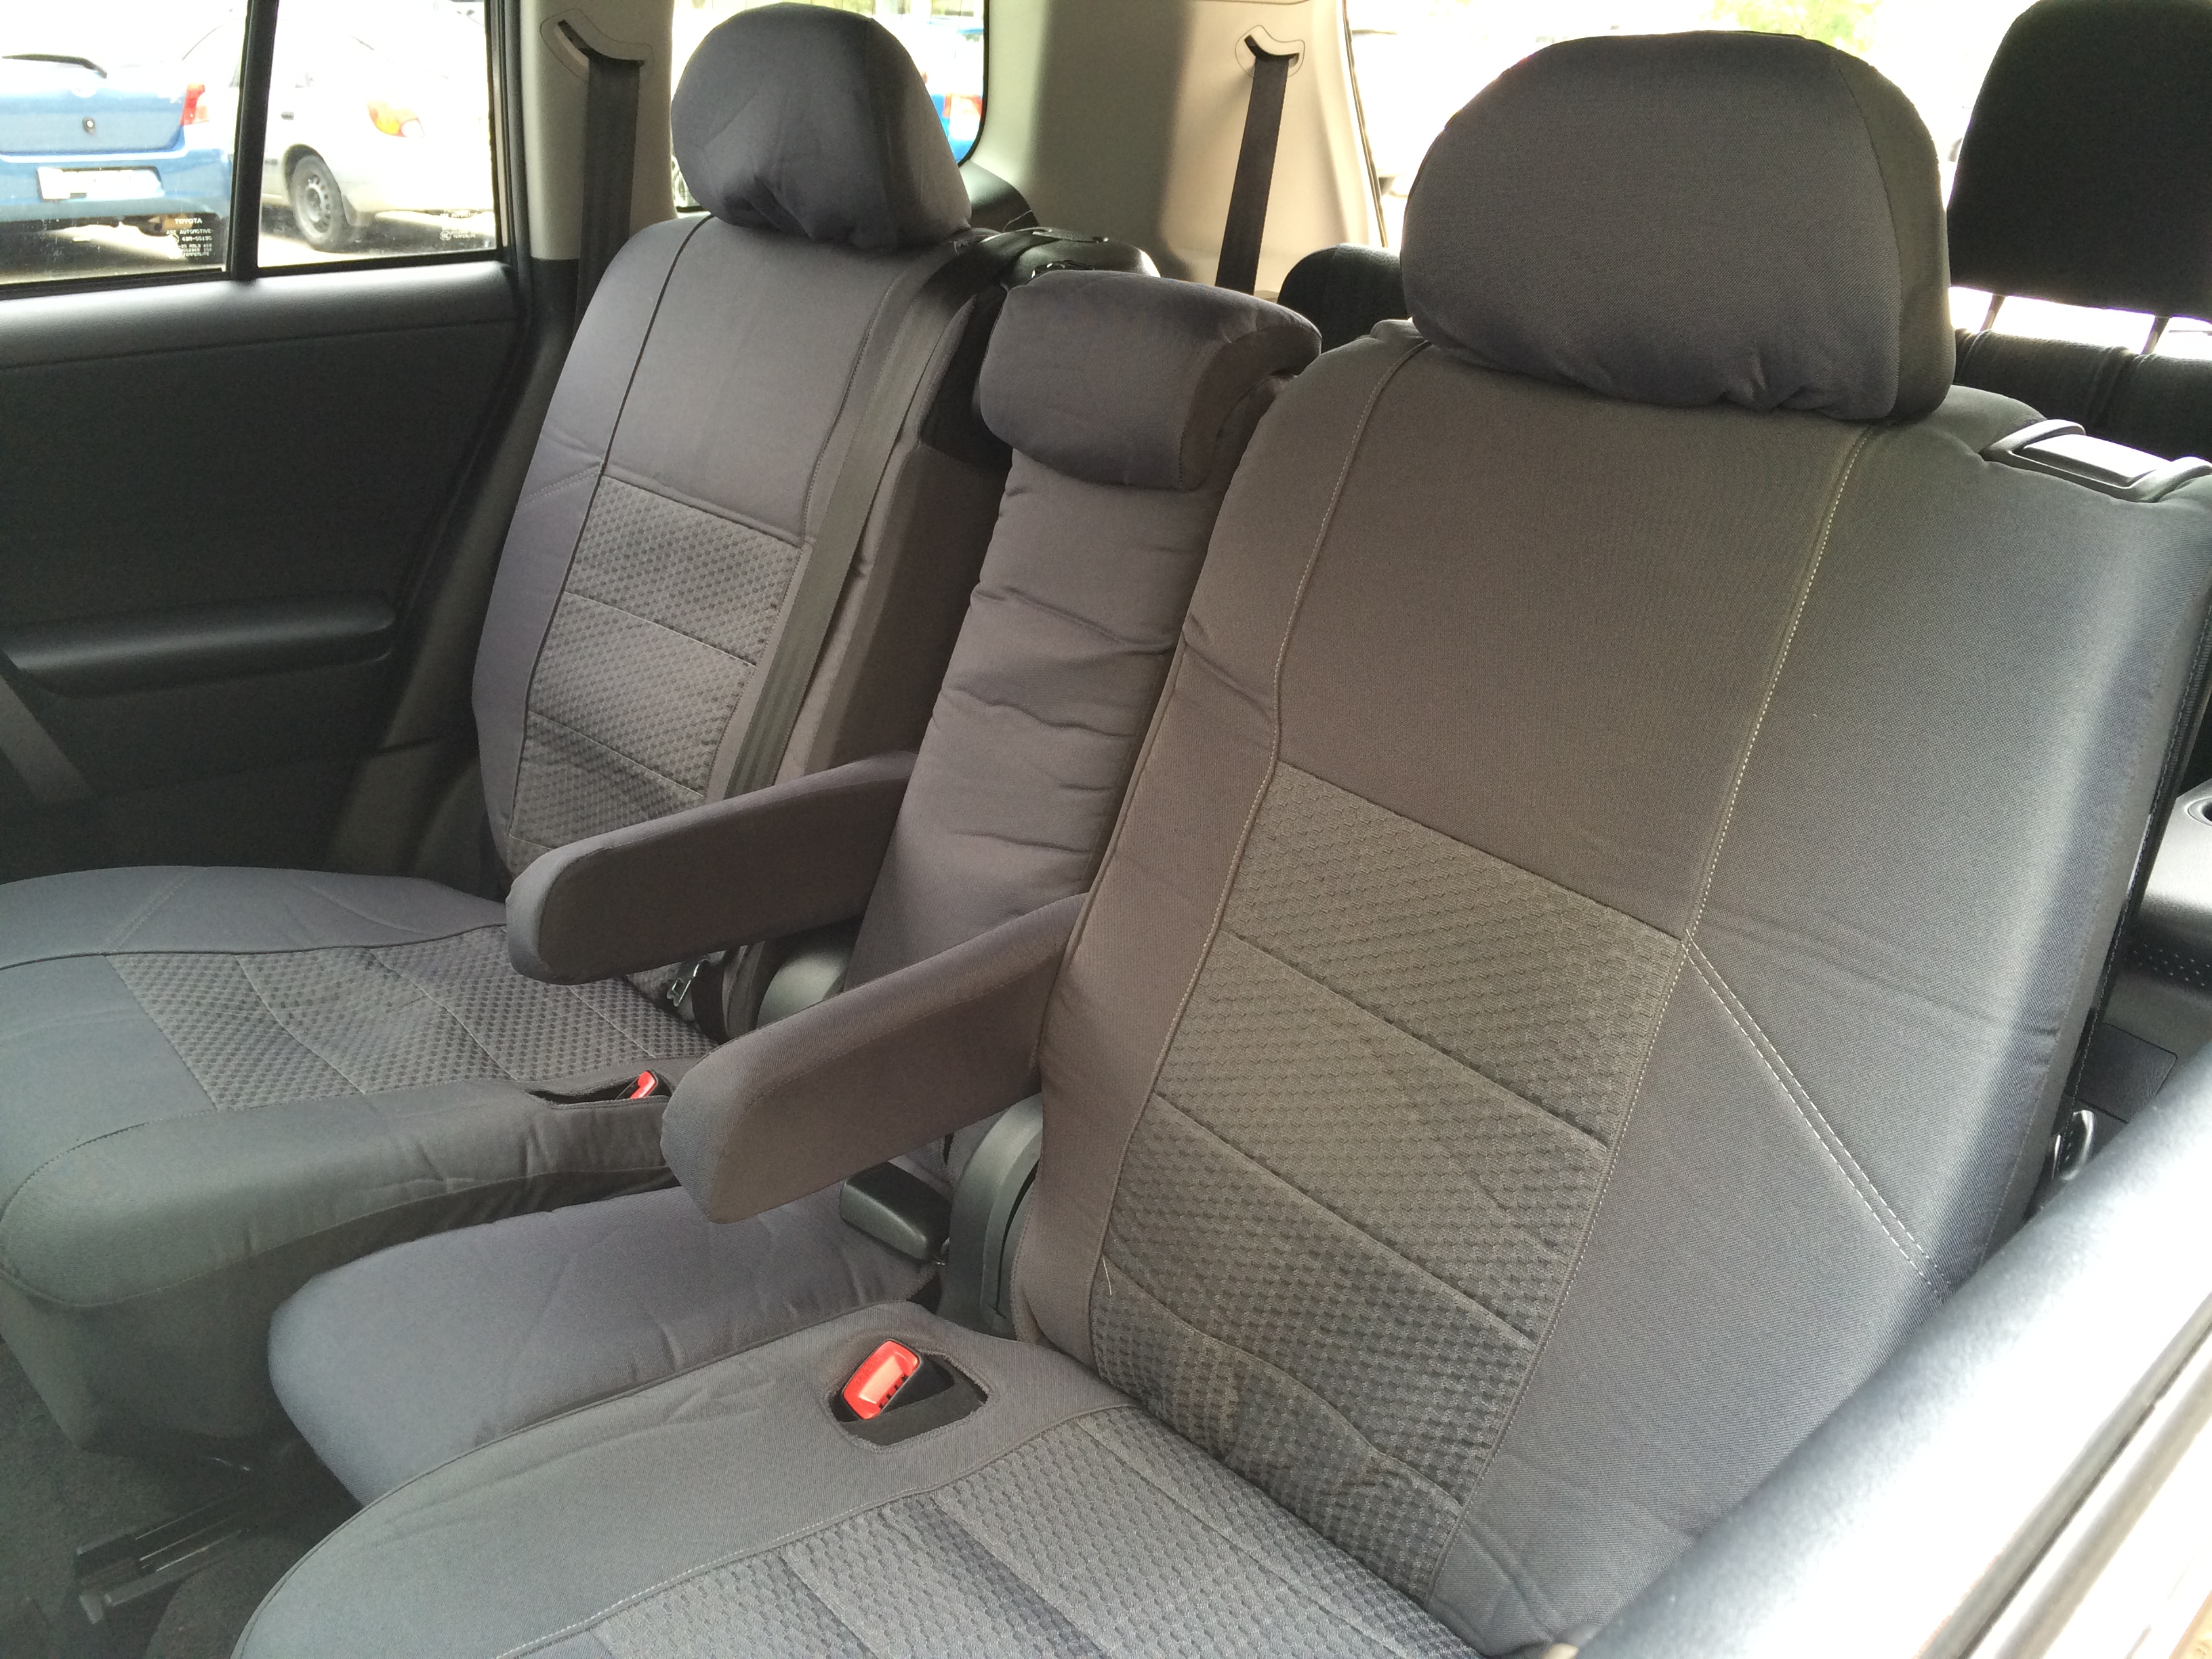 Tailor Made Seat Covers